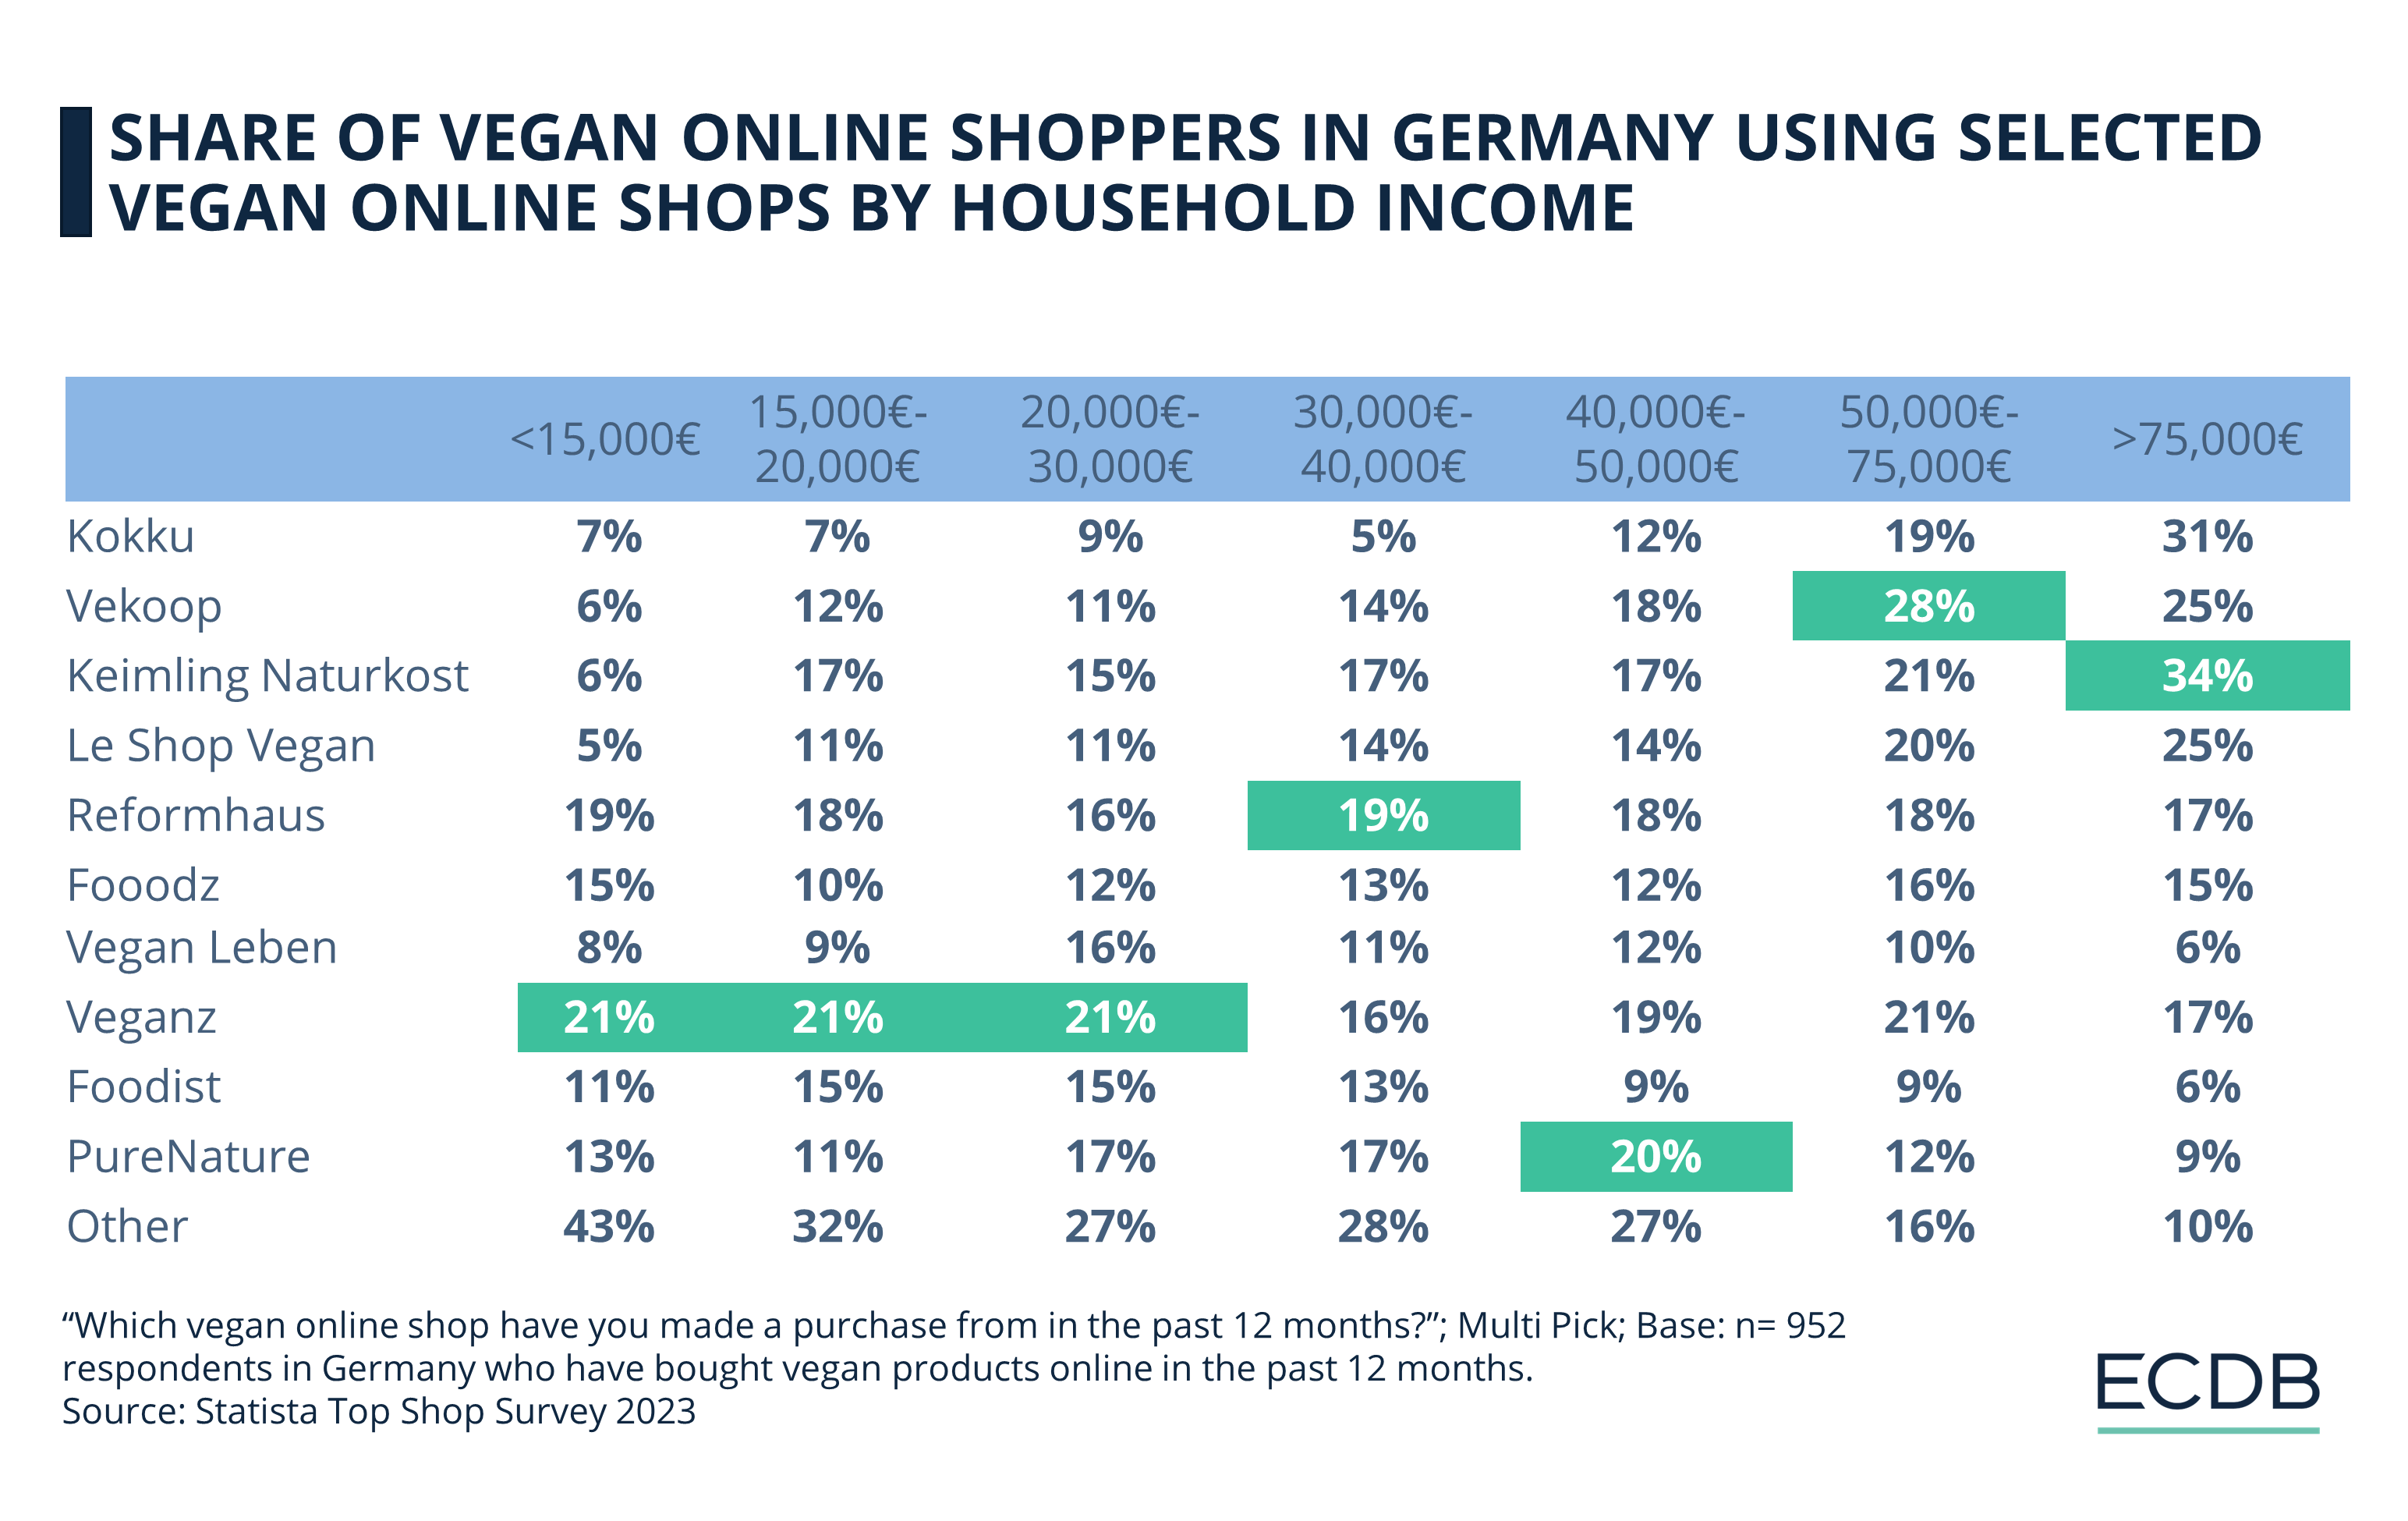 Share of Vegan Online Shoppers in Germany Using Selected Vegan Online Shops by Household Income